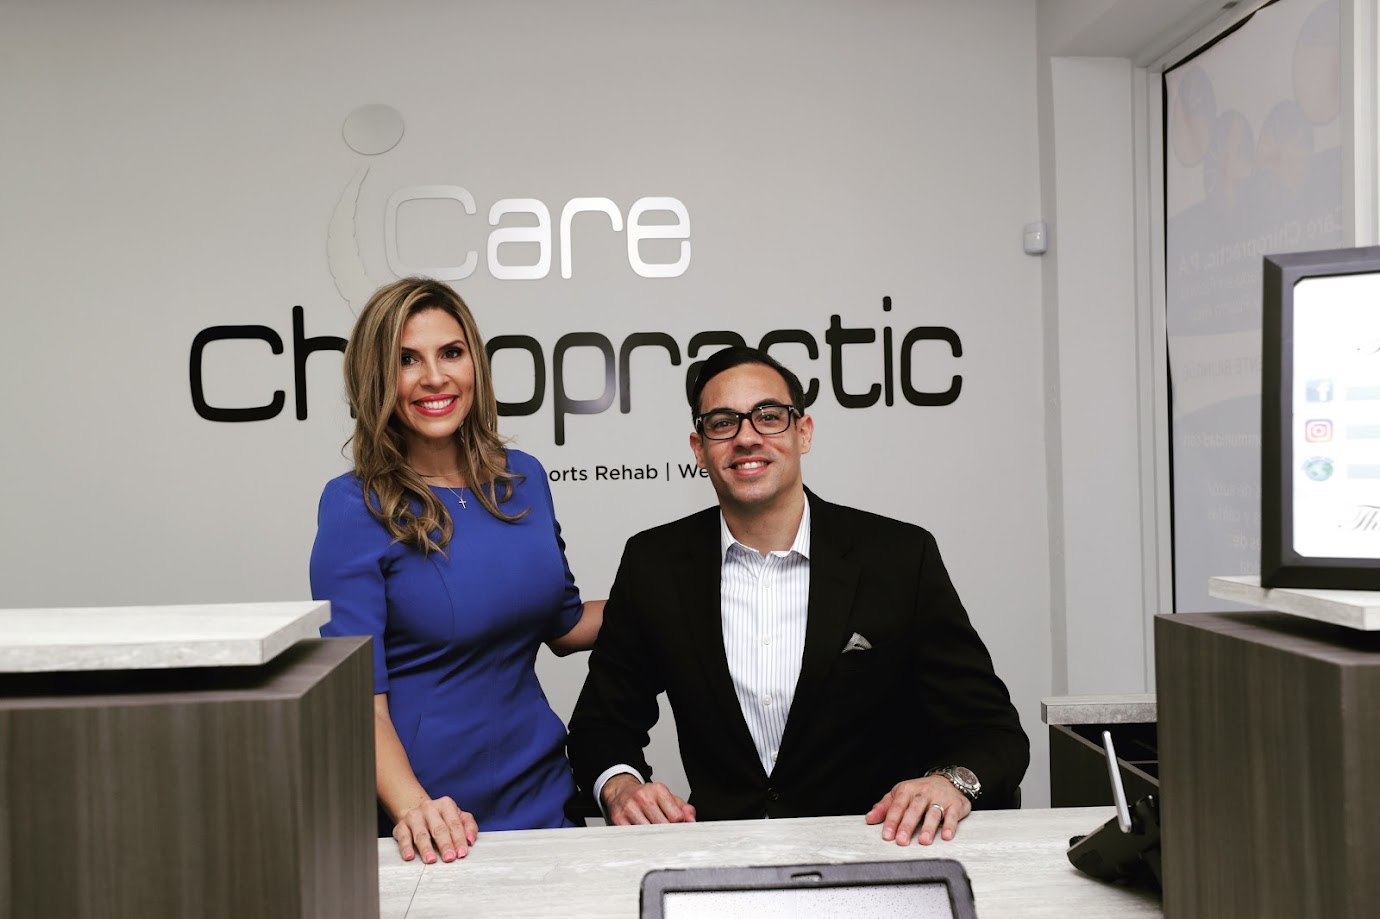 iCare Chiropractic, P.A.